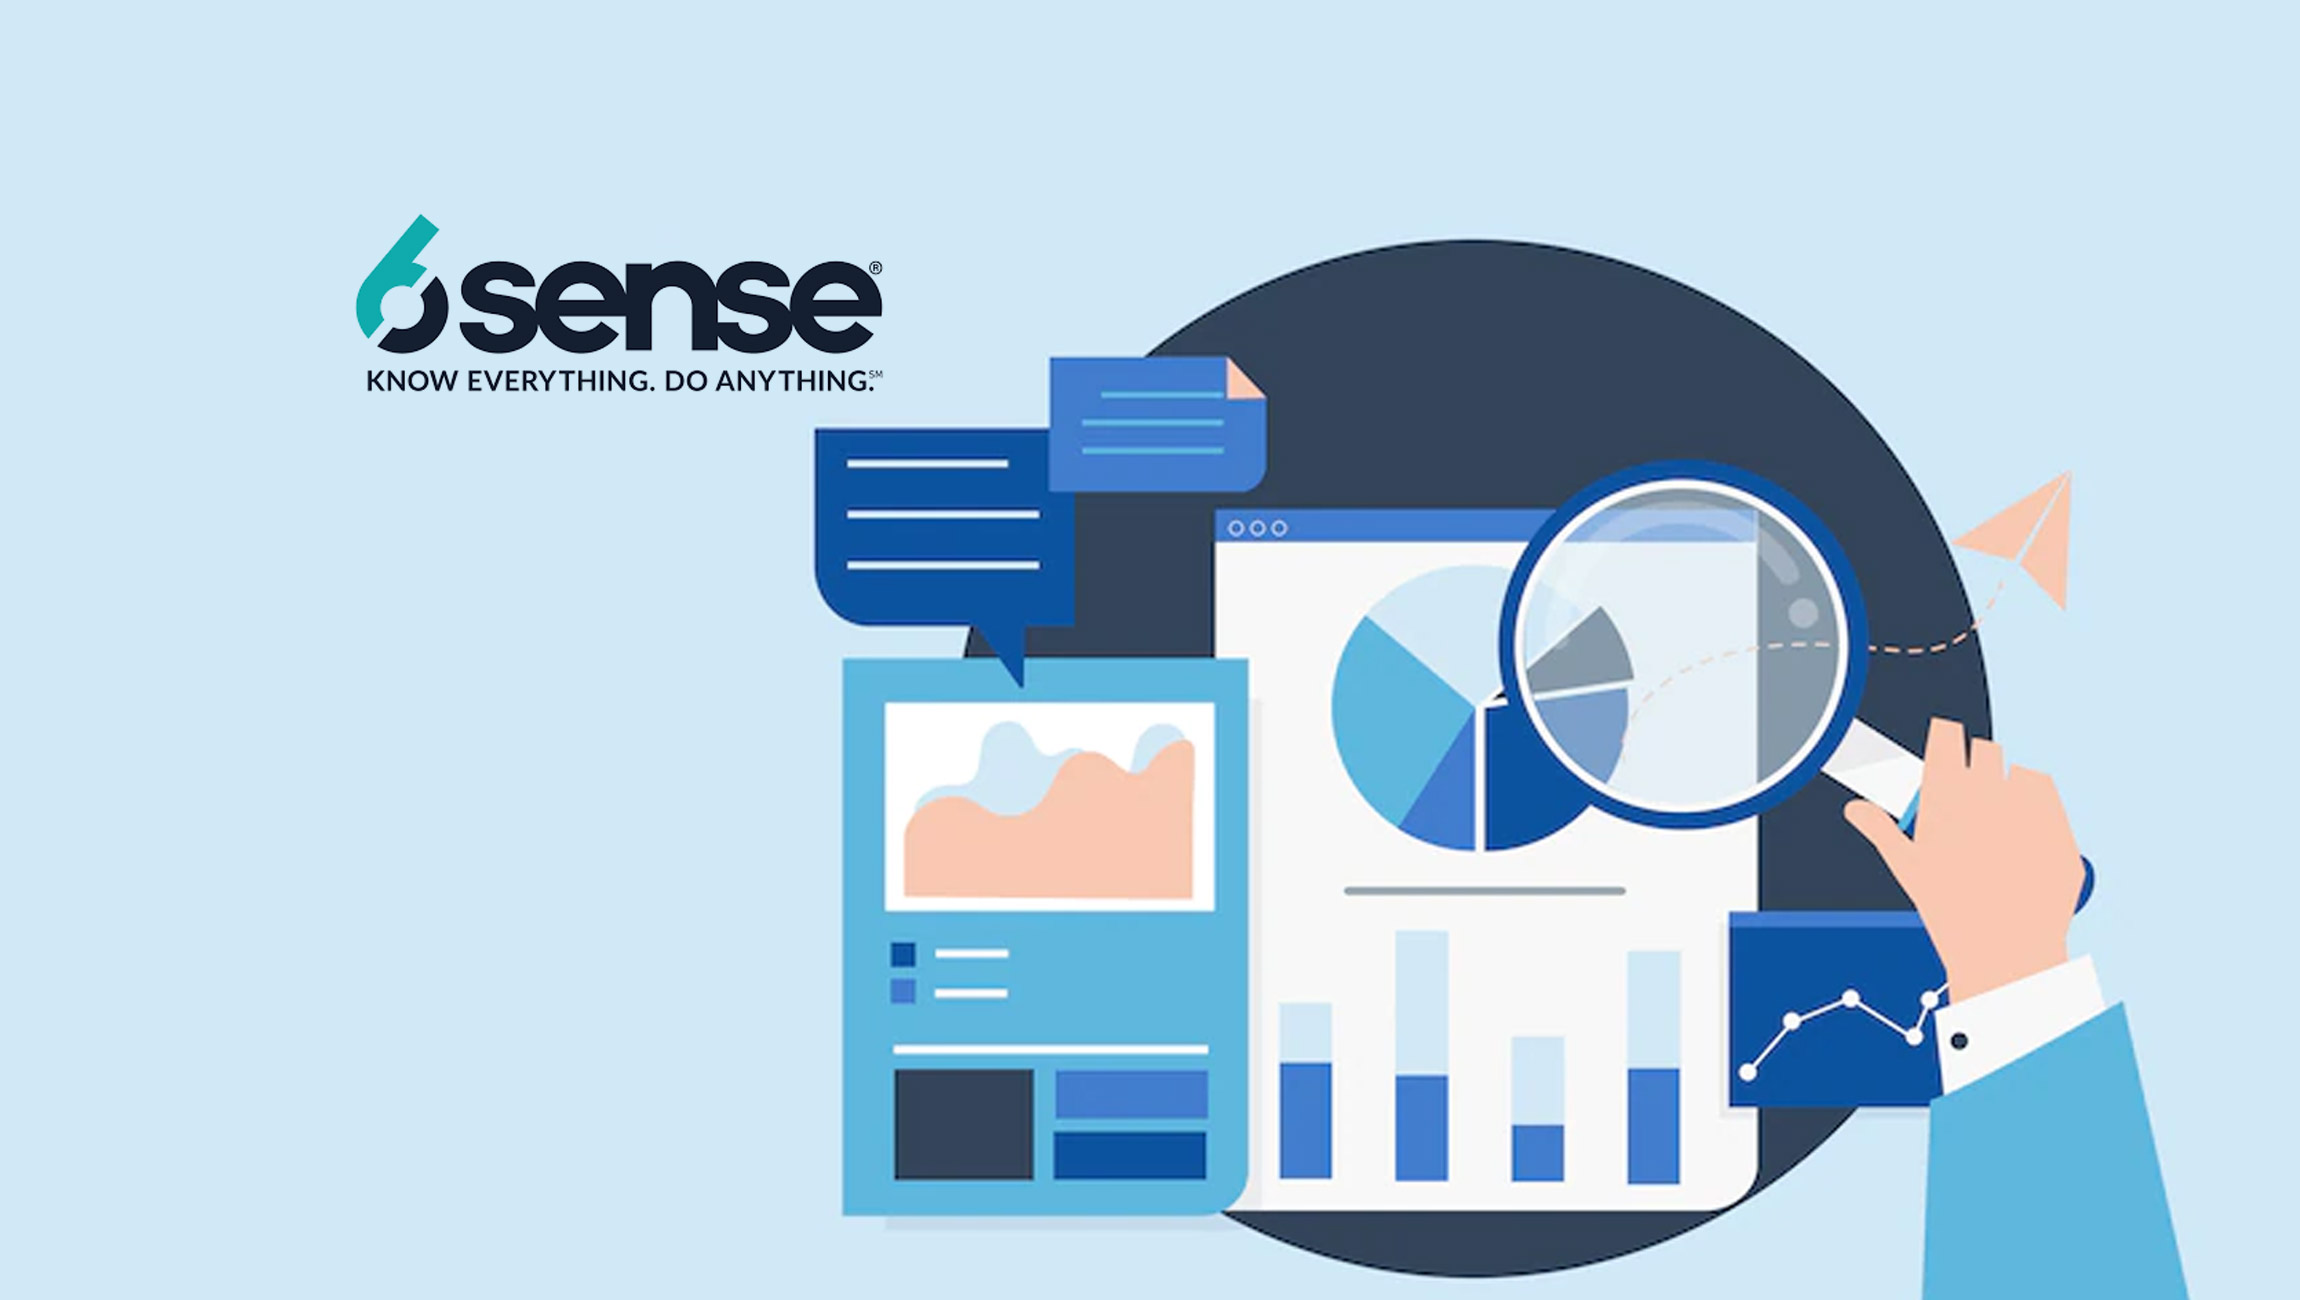 6sense Named To 2022 List of 50 Best Companies to Sell For